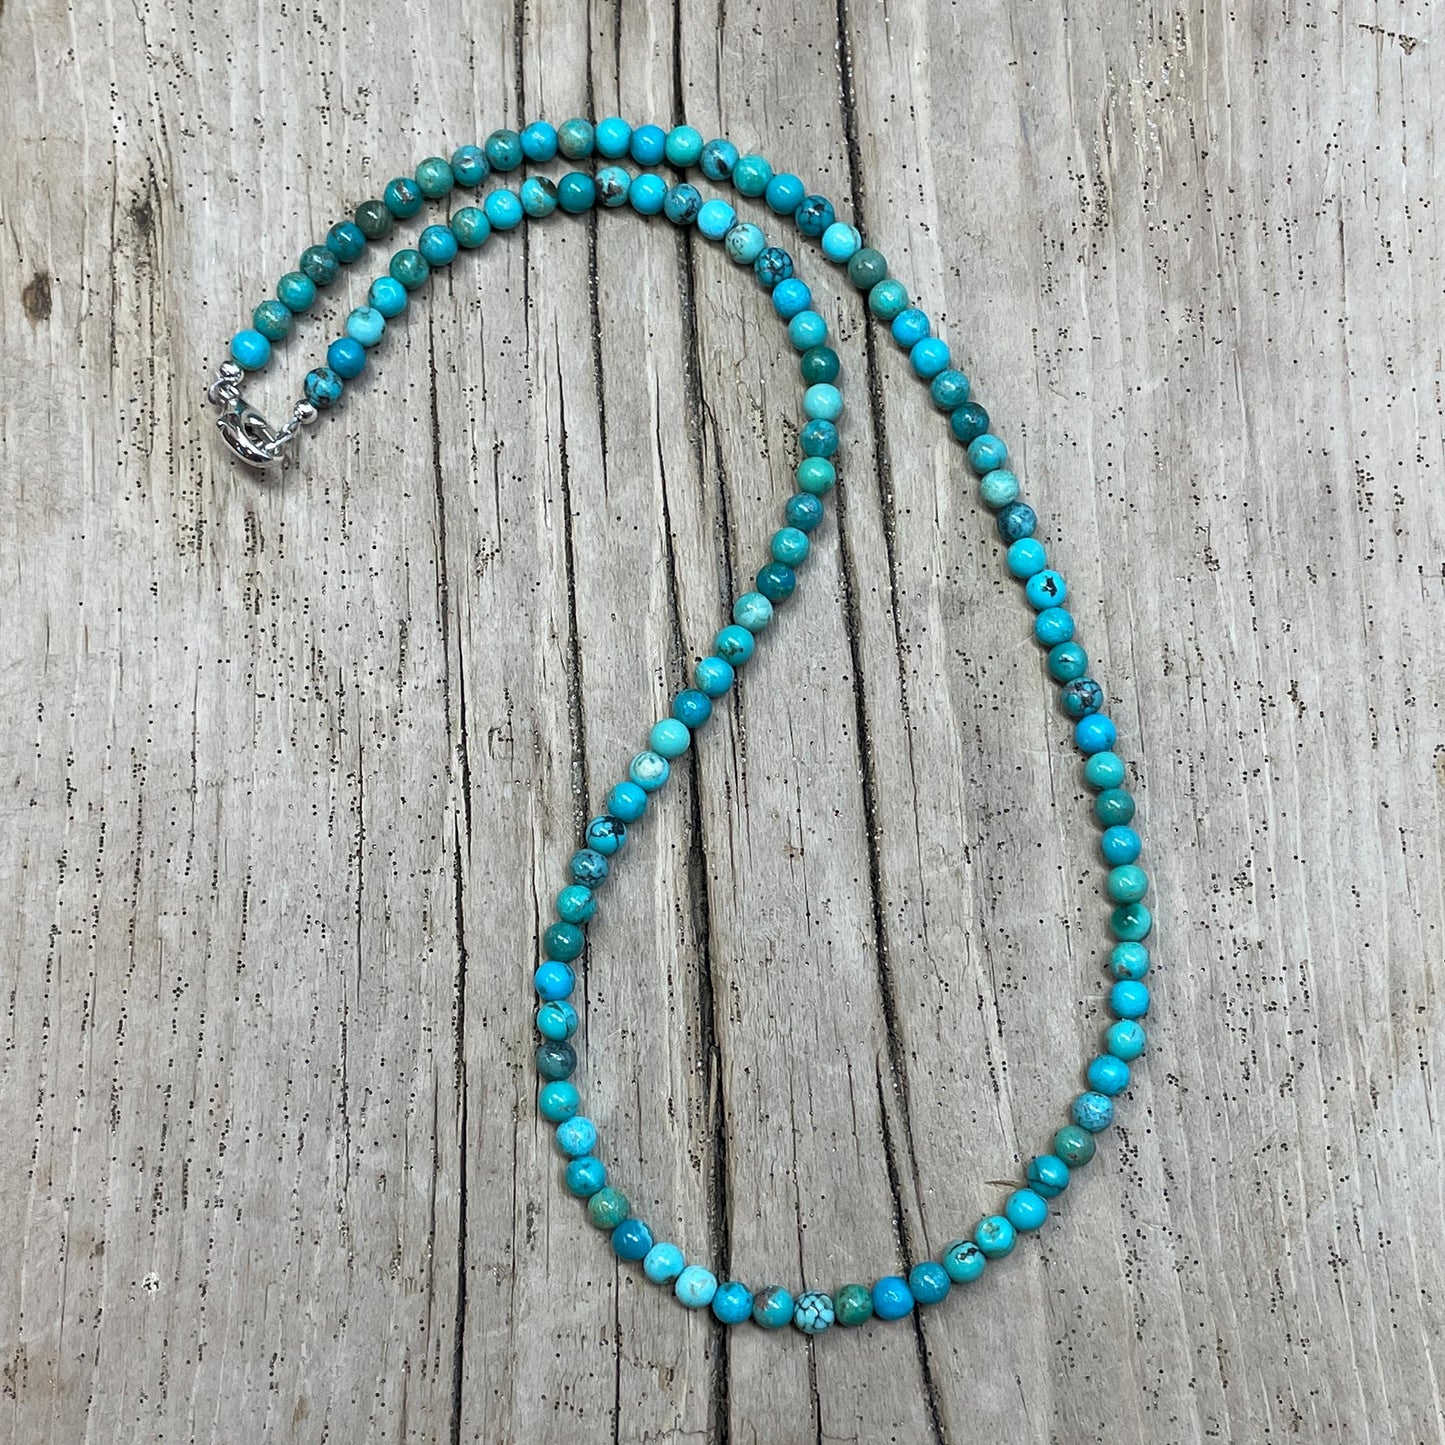 Mens Coconut and Turquoise Necklace.mens Beaded Necklace. Mens Necklace.  Surfer Style Necklace. Mens Turquoise Necklace. Wood Bead Necklace. - Etsy  | Beaded necklace, Mens beaded necklaces, Wood bead necklace